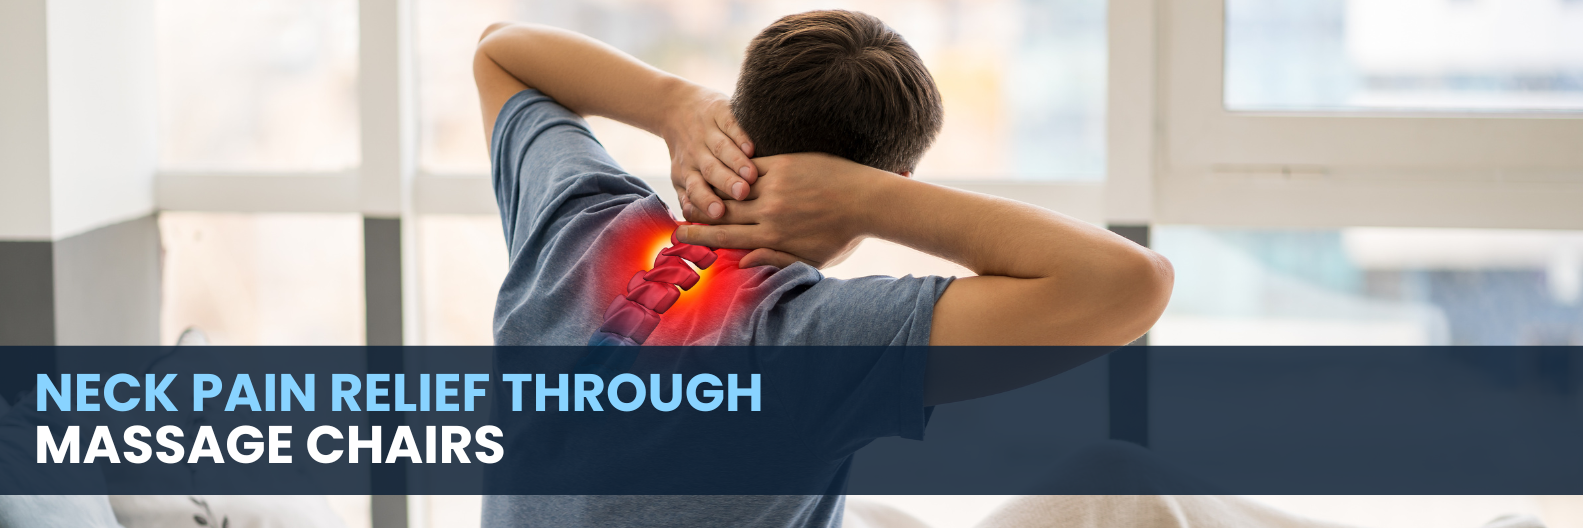 Explore the comprehensive guide to alleviating neck pain through massage chair therapy. Gain insights into health considerations and the benefits offered by massage chairs.